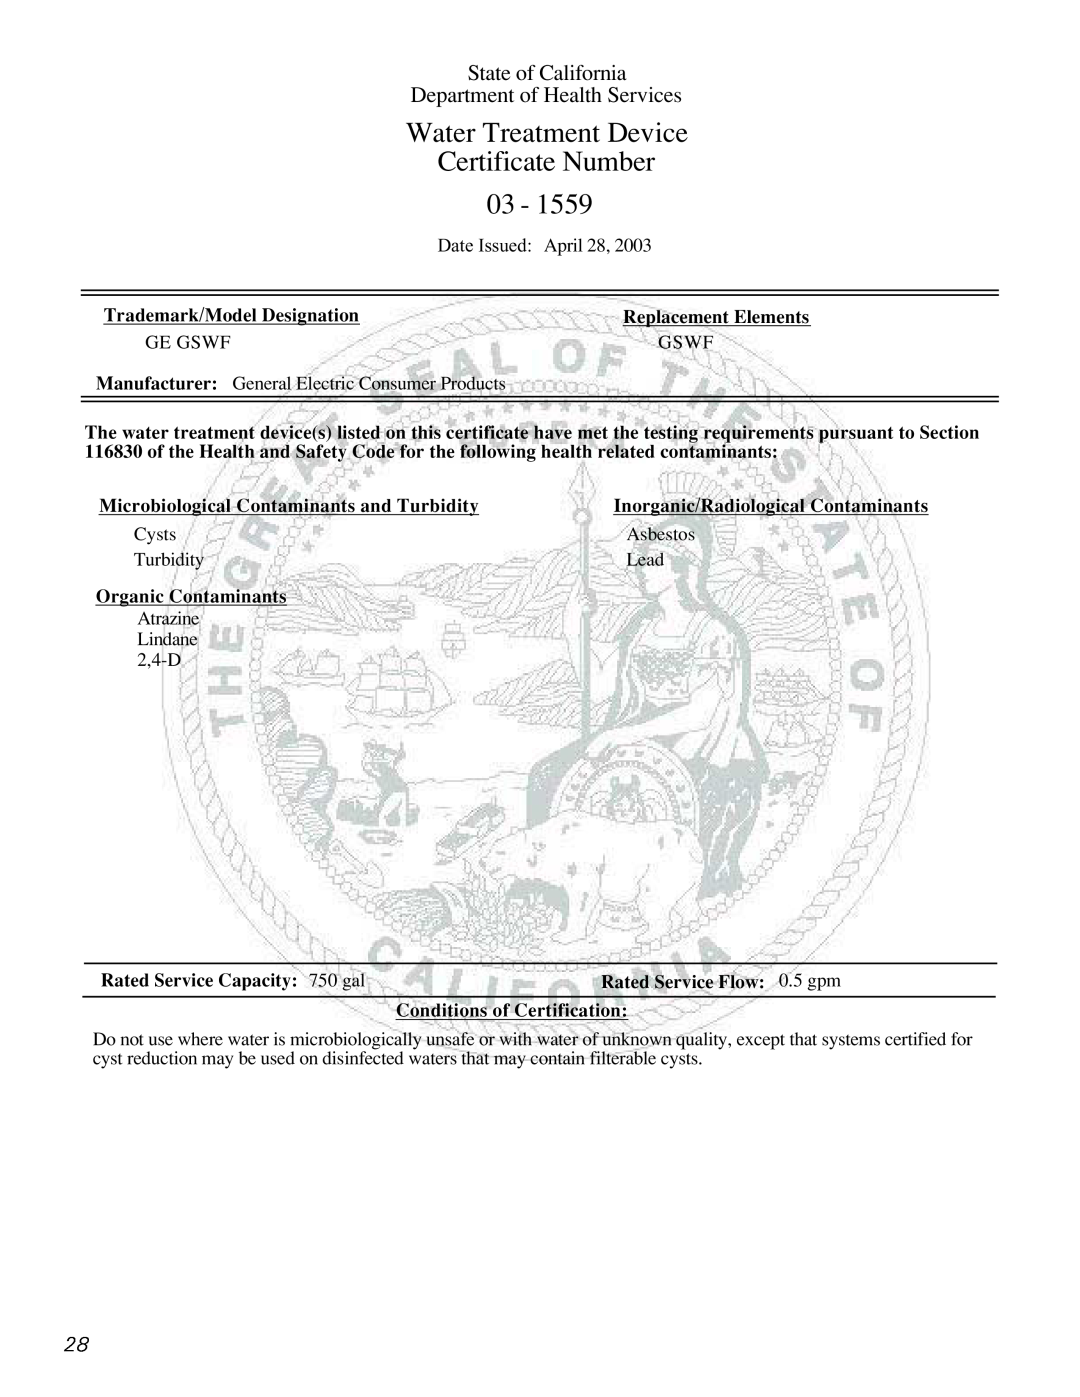 LG Electronics 22, 25 Water Treatment Device, Certificate Number, State of California, Department of Health Services 